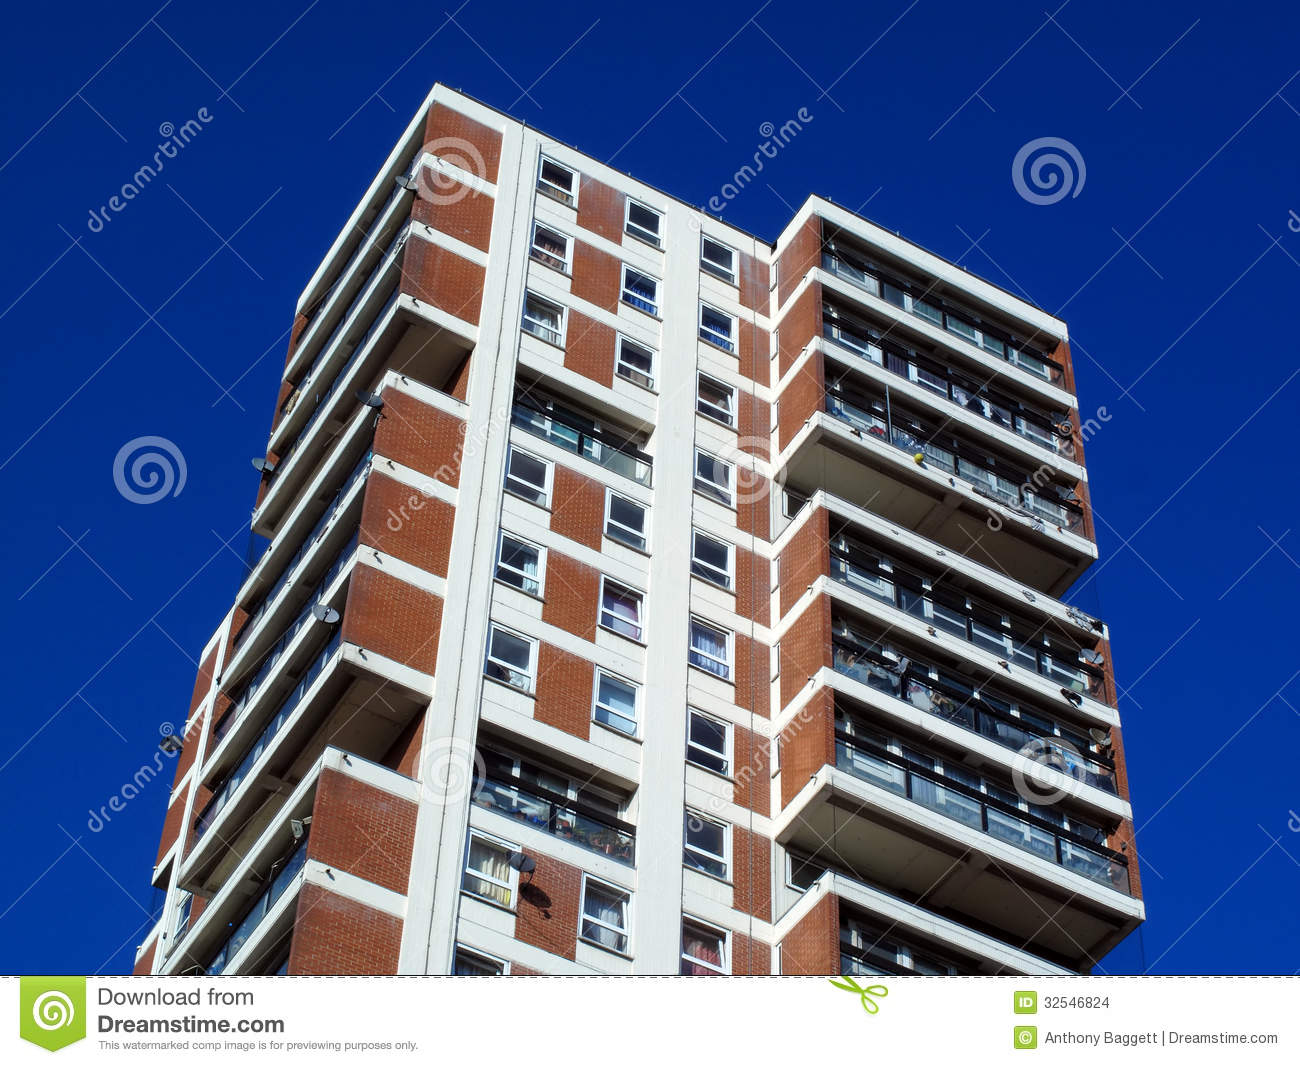 Tower Block Stock Images   Image  32546824